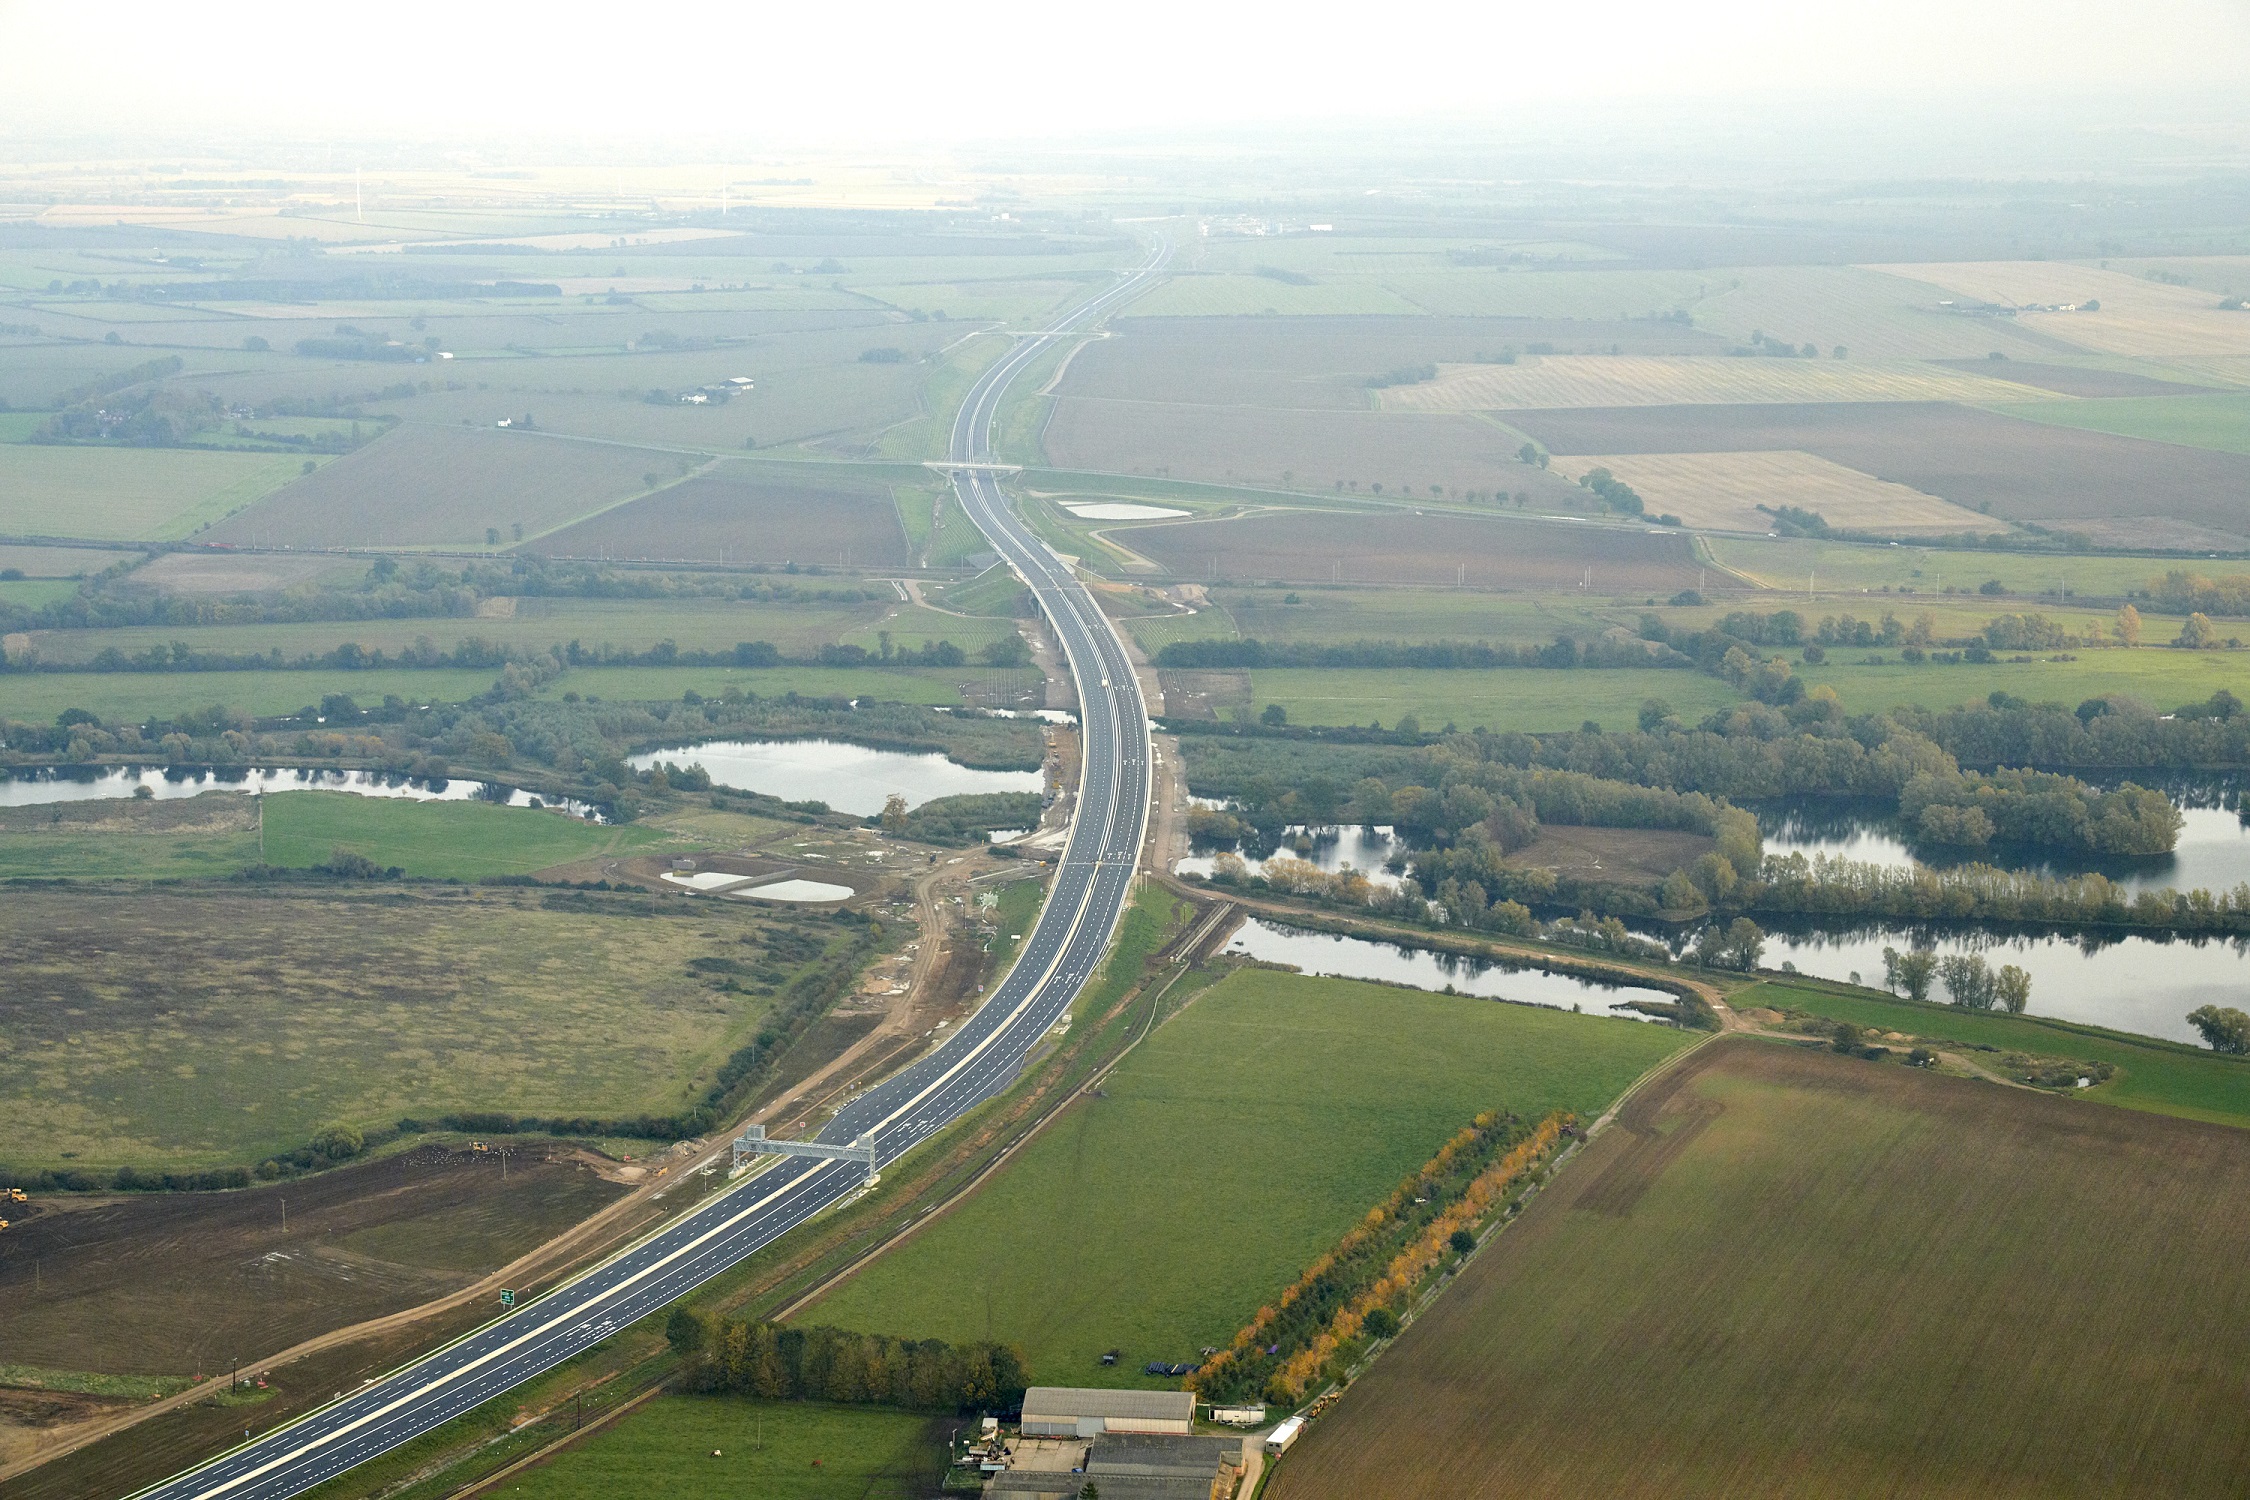 A14 Huntingdon bypass opens 